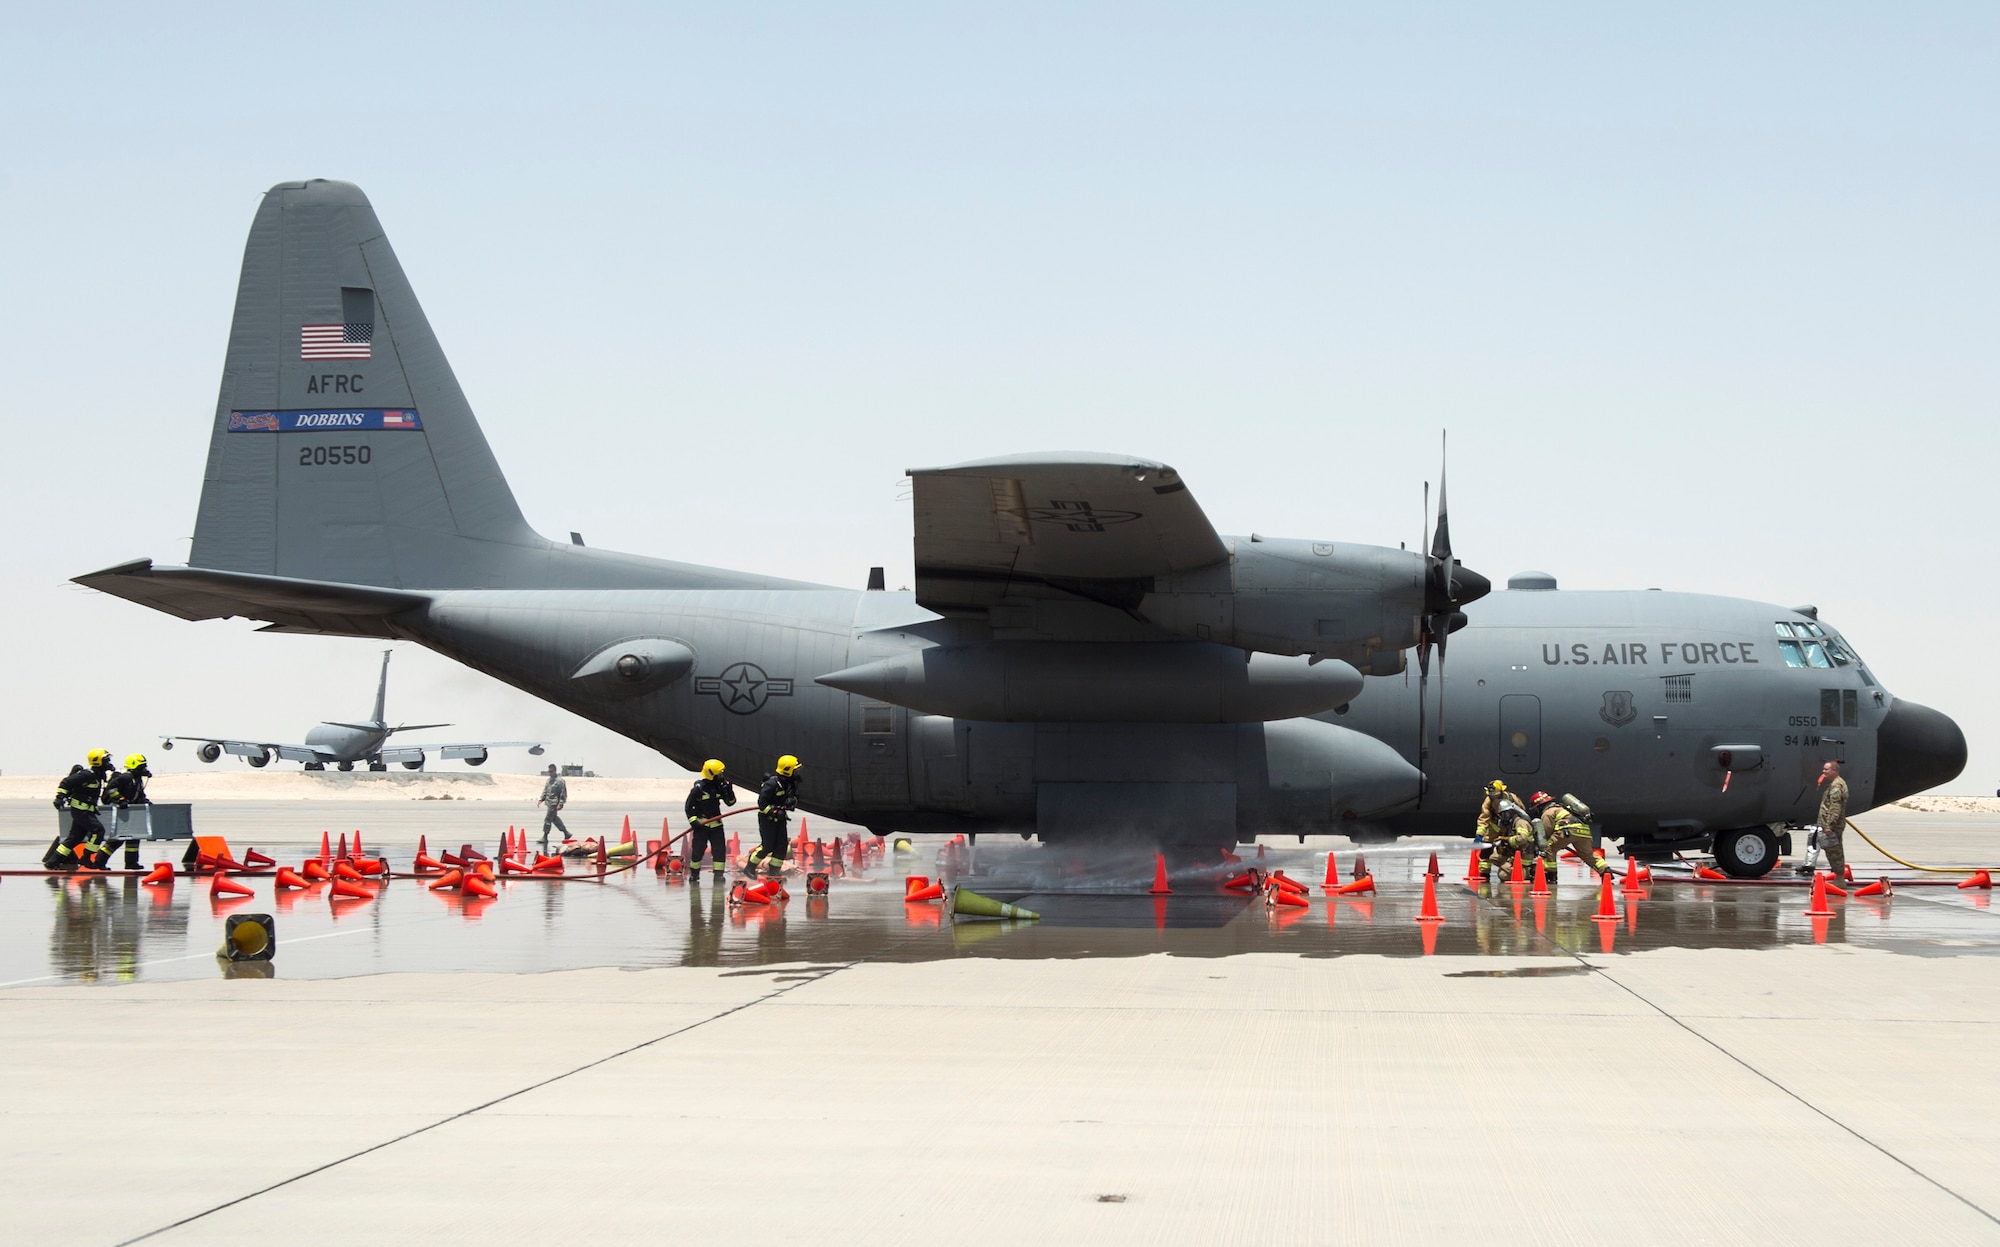 Firefighters with the 379th Expeditionary Civil Engineer Squadron’s Fire and Emergency Services Flight, and the Qatar Emiri Air Force Fire Department responsed to a simulated aircraft explosion during a joint C-130 Hercules aircraft exercise at Al Udeid Air Base, Qatar, Aug. 1, 2017.